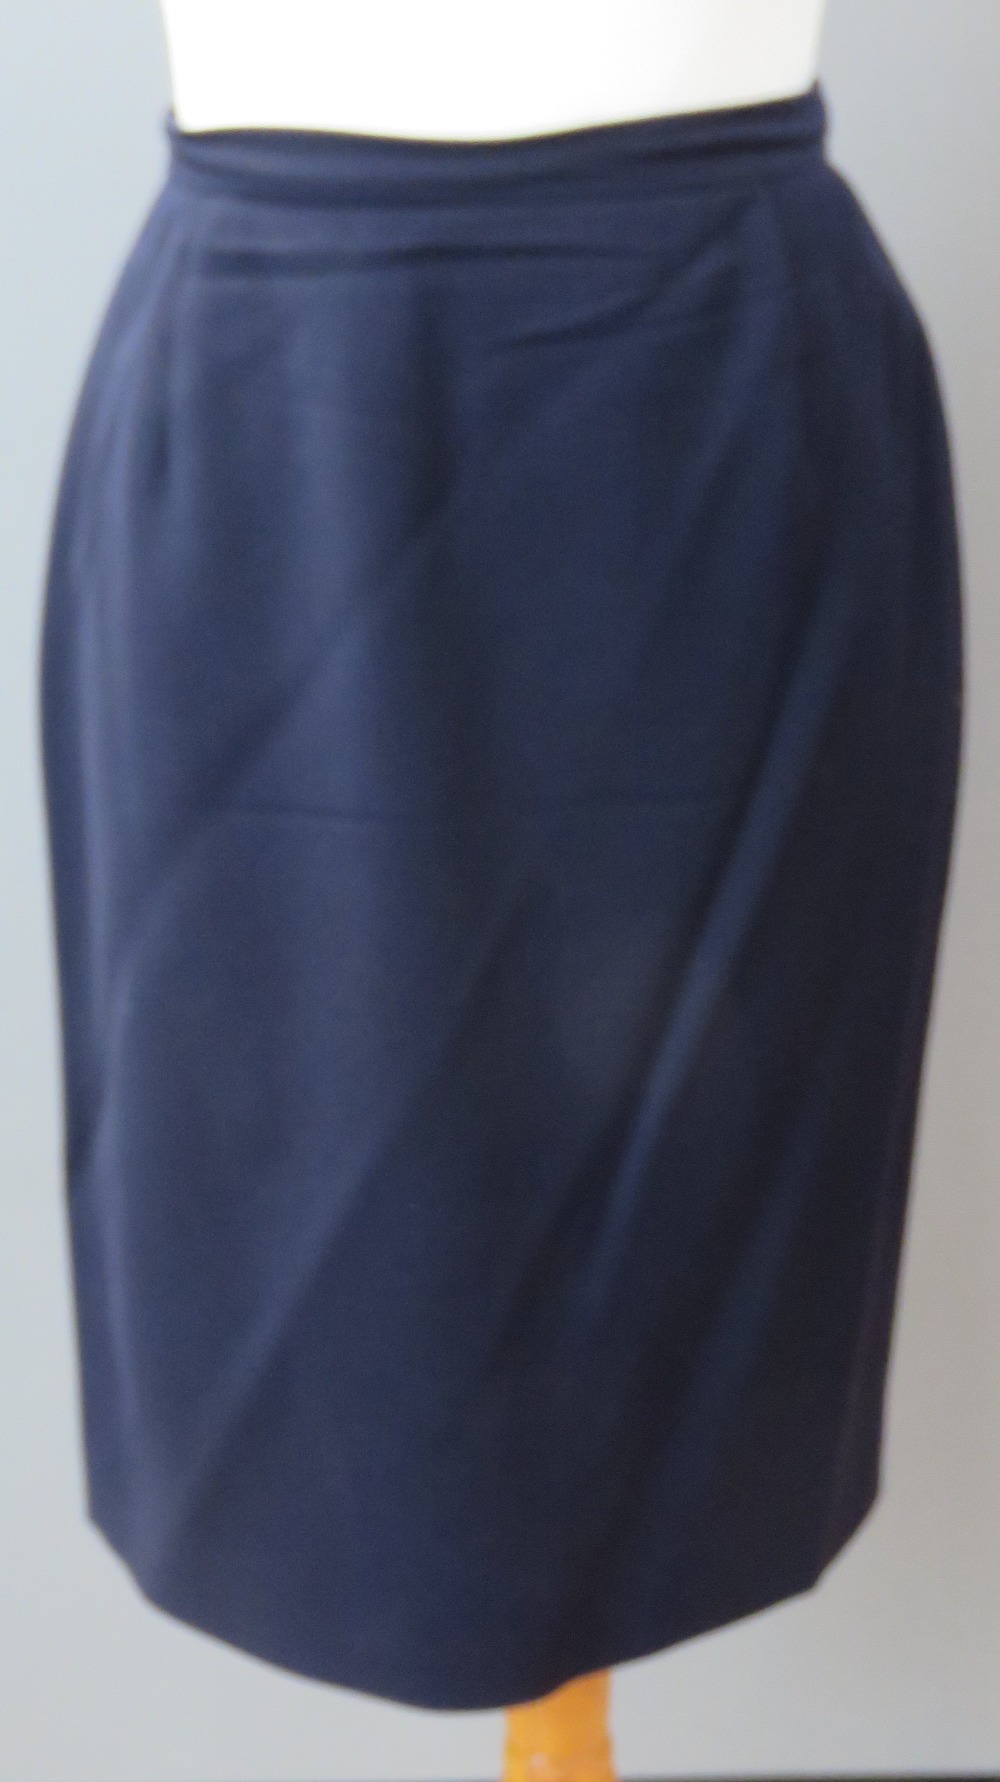 Jaeger; A navy blue 100% new pure wool jacket and skirt, jacket having breast pockets and epaulets, - Image 3 of 8